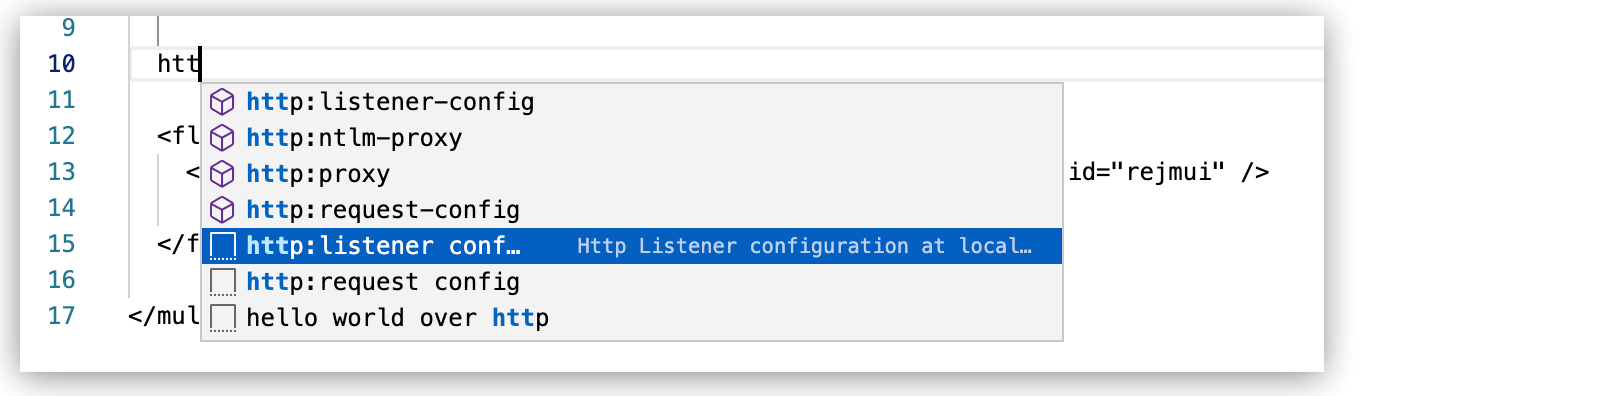 http:listener-config snippet highlighted in the configuration XML menu